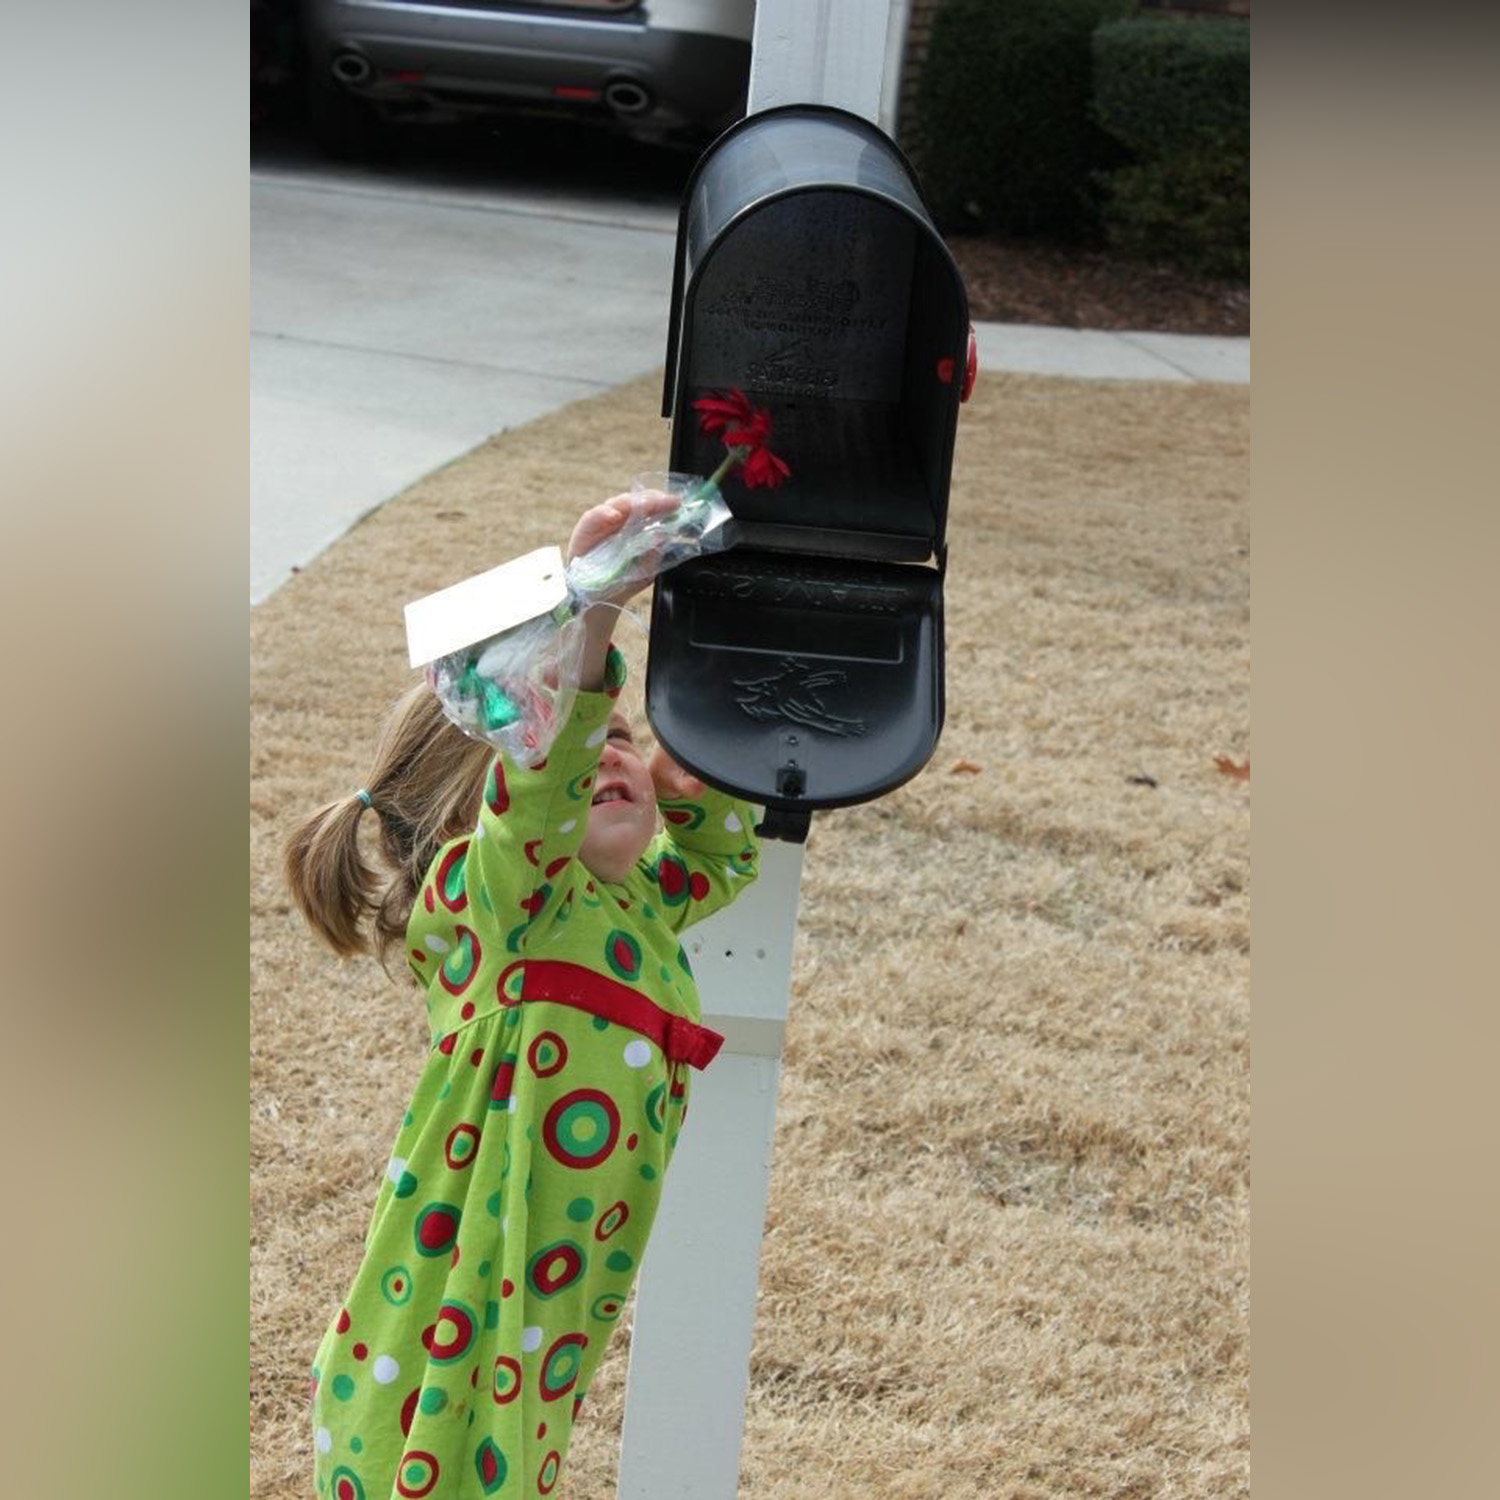 PHOTO: Courtney DeFeo's daughter Larson, then 2, puts a thank you note in the mailbox for the family's mail carrier in an undated handout photo.